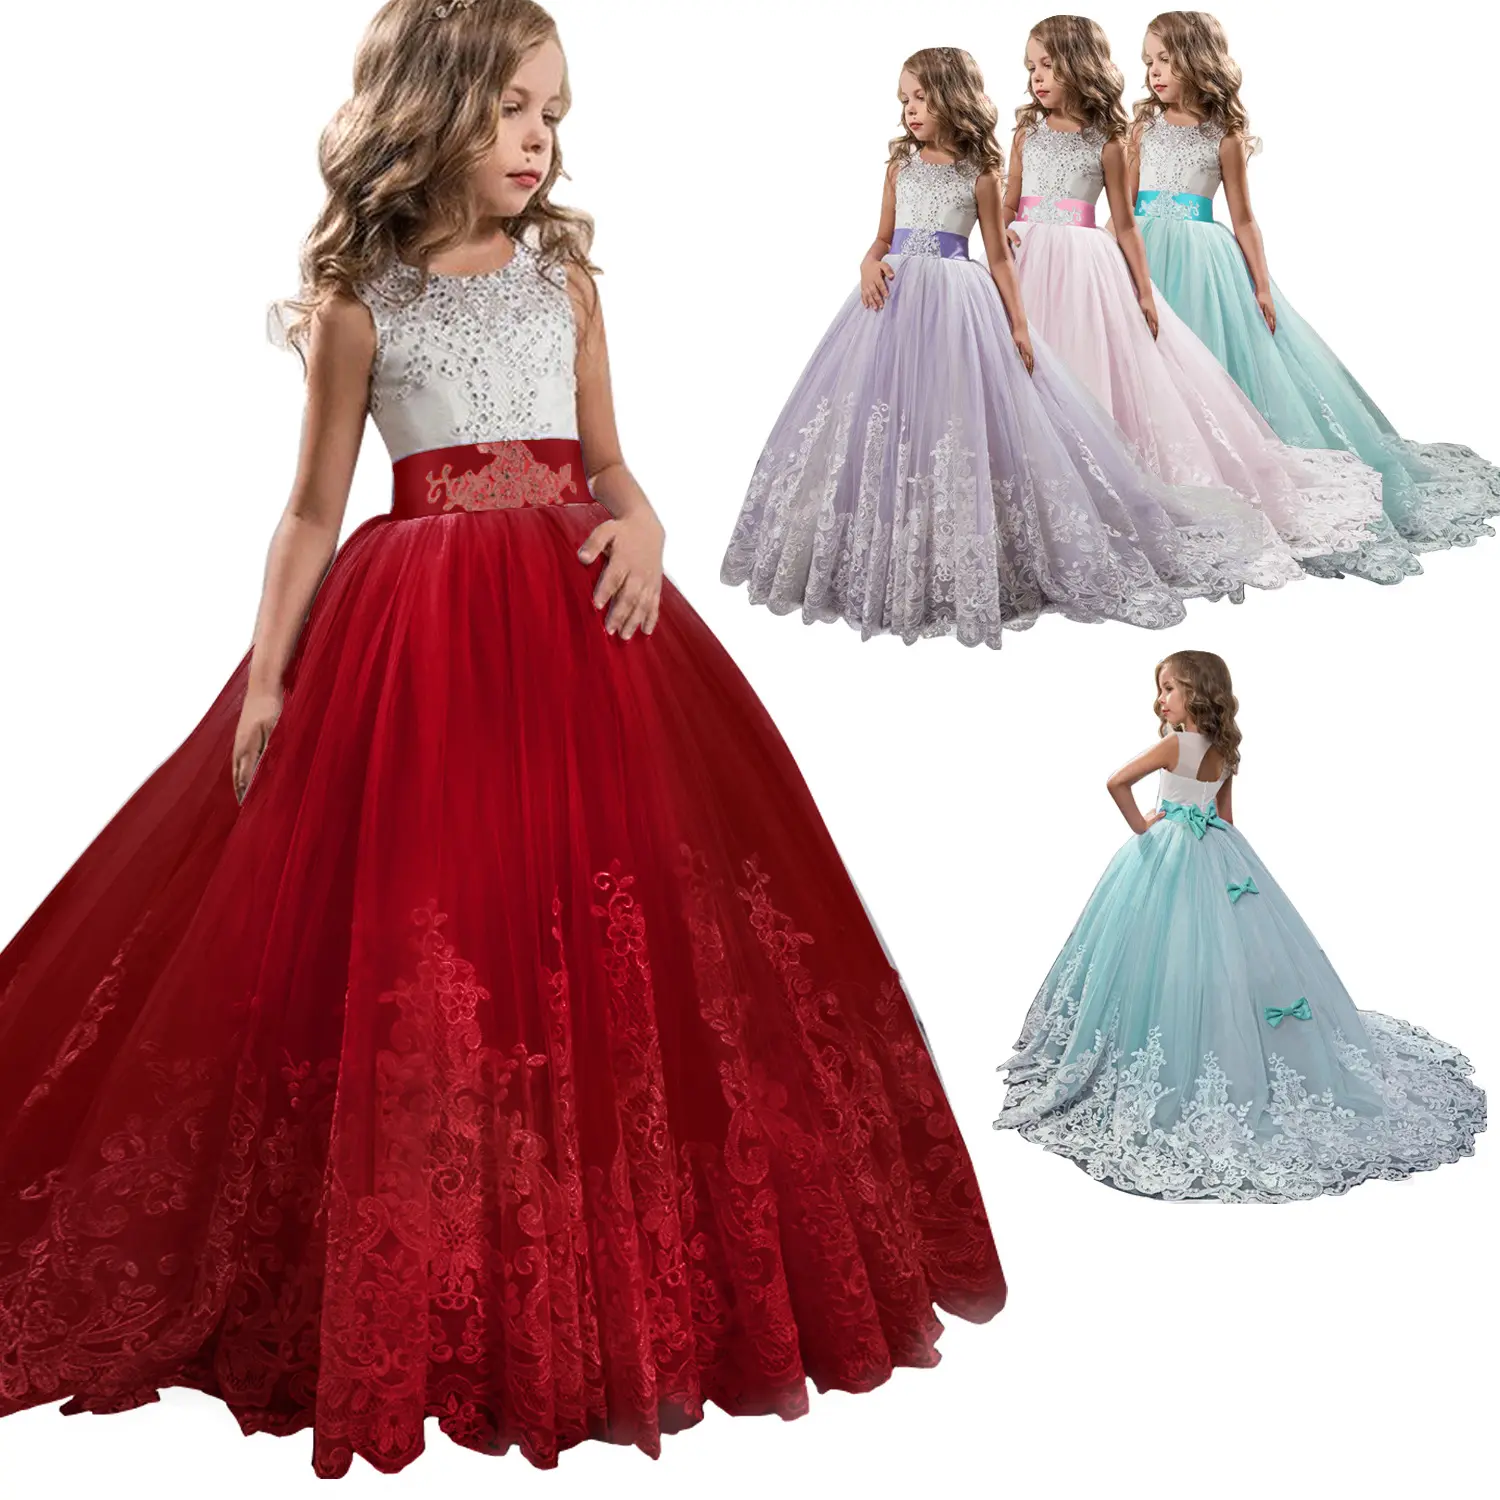 Kids Little Girls' Dress Lace Floral Princess Party Formal Evening Wedding Pageant Embroidery Tulle Maxi Elegant Vintage Dress